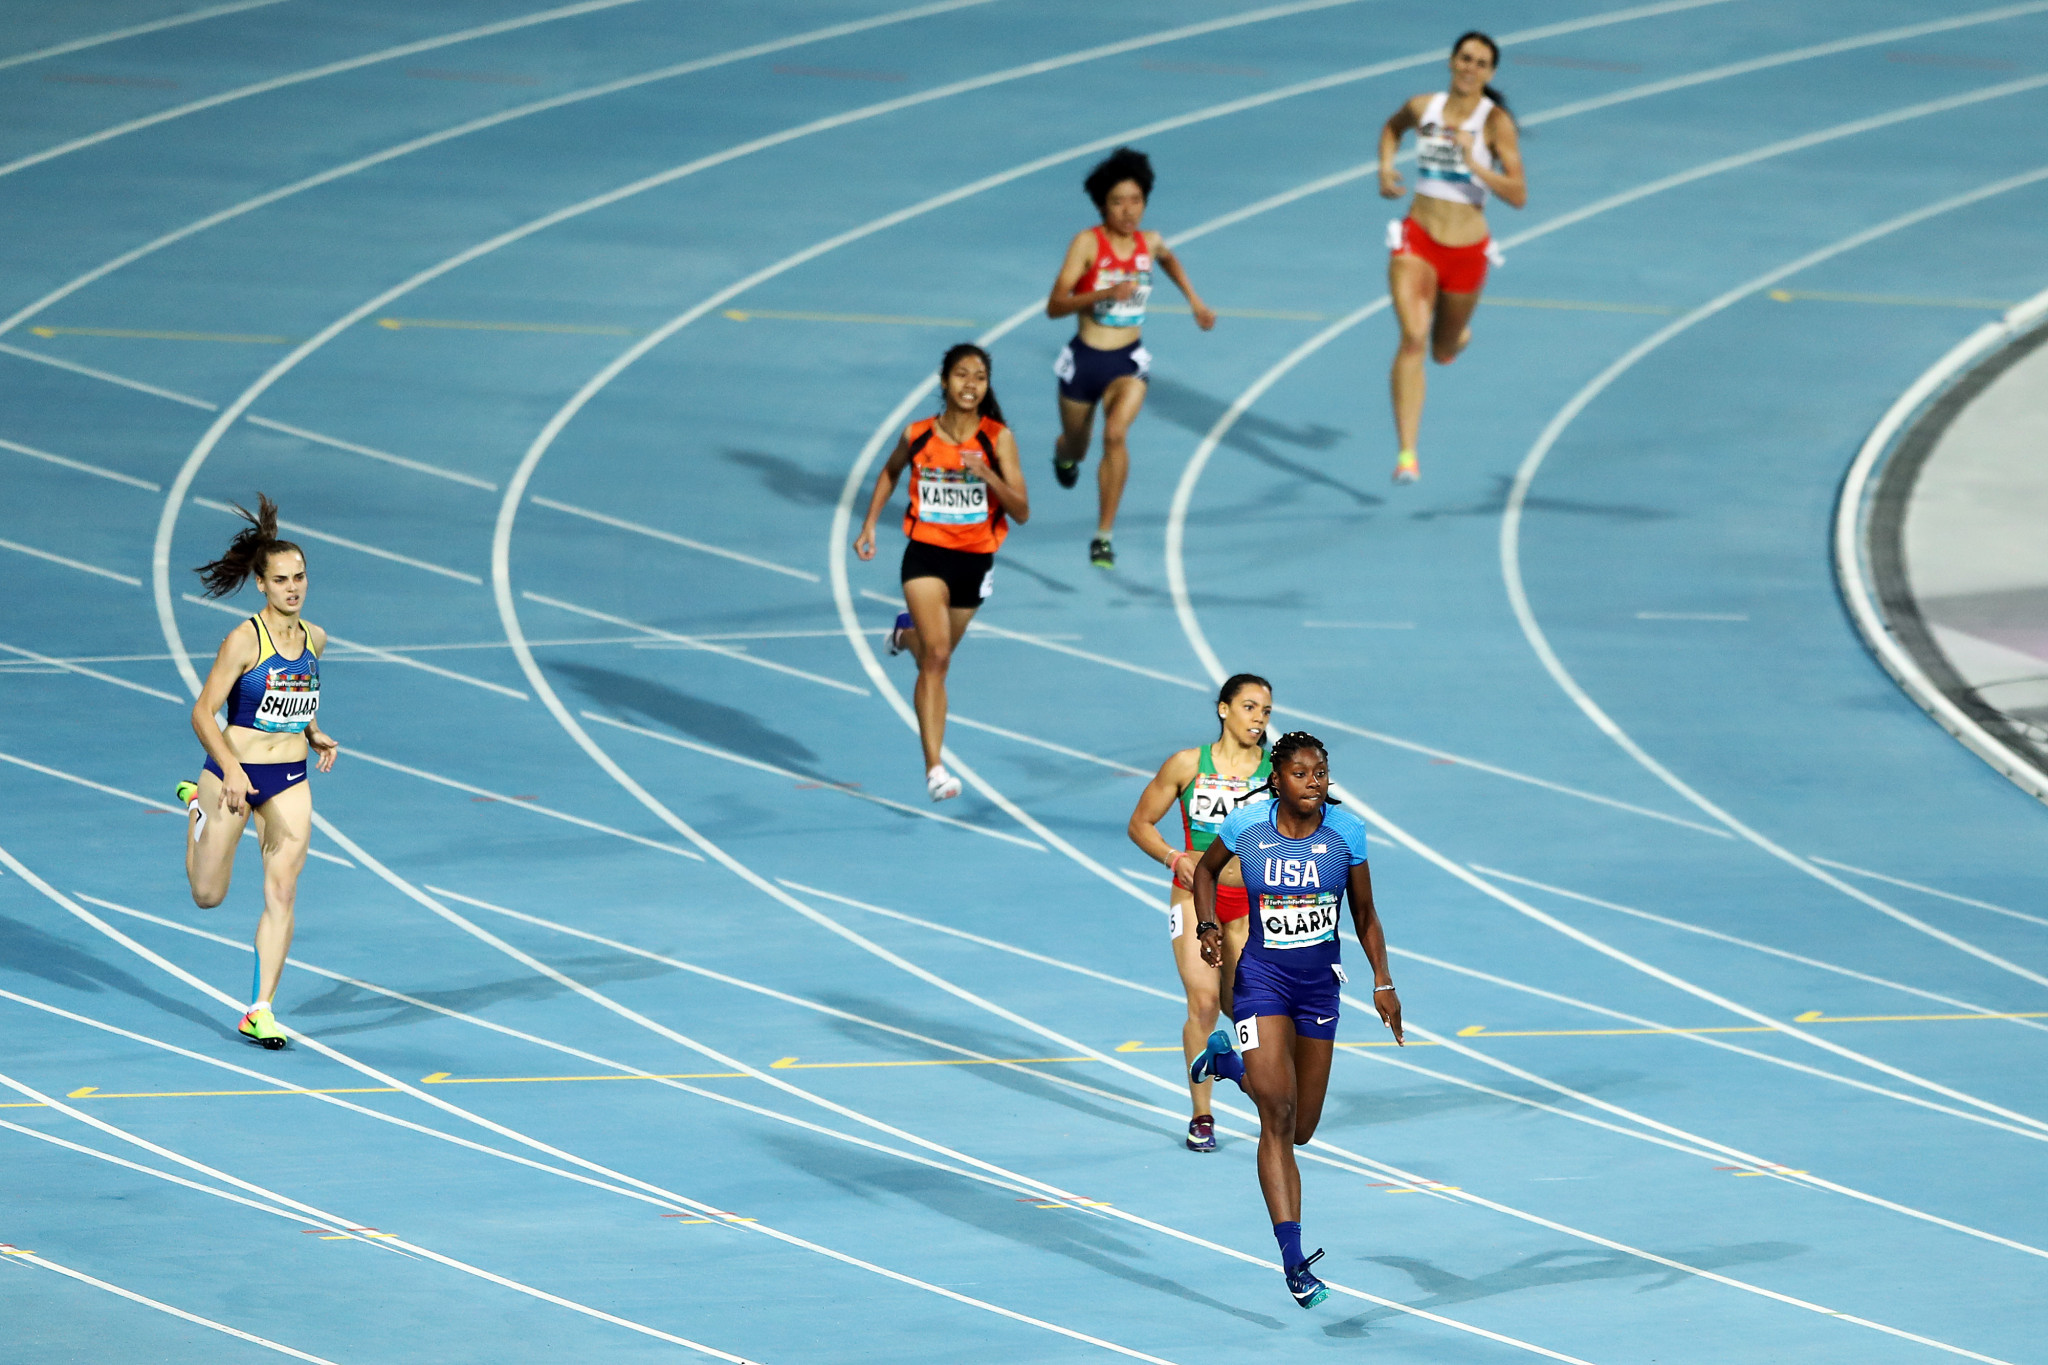 World Para Athletics Championships to be postponed until 2022, reports suggest